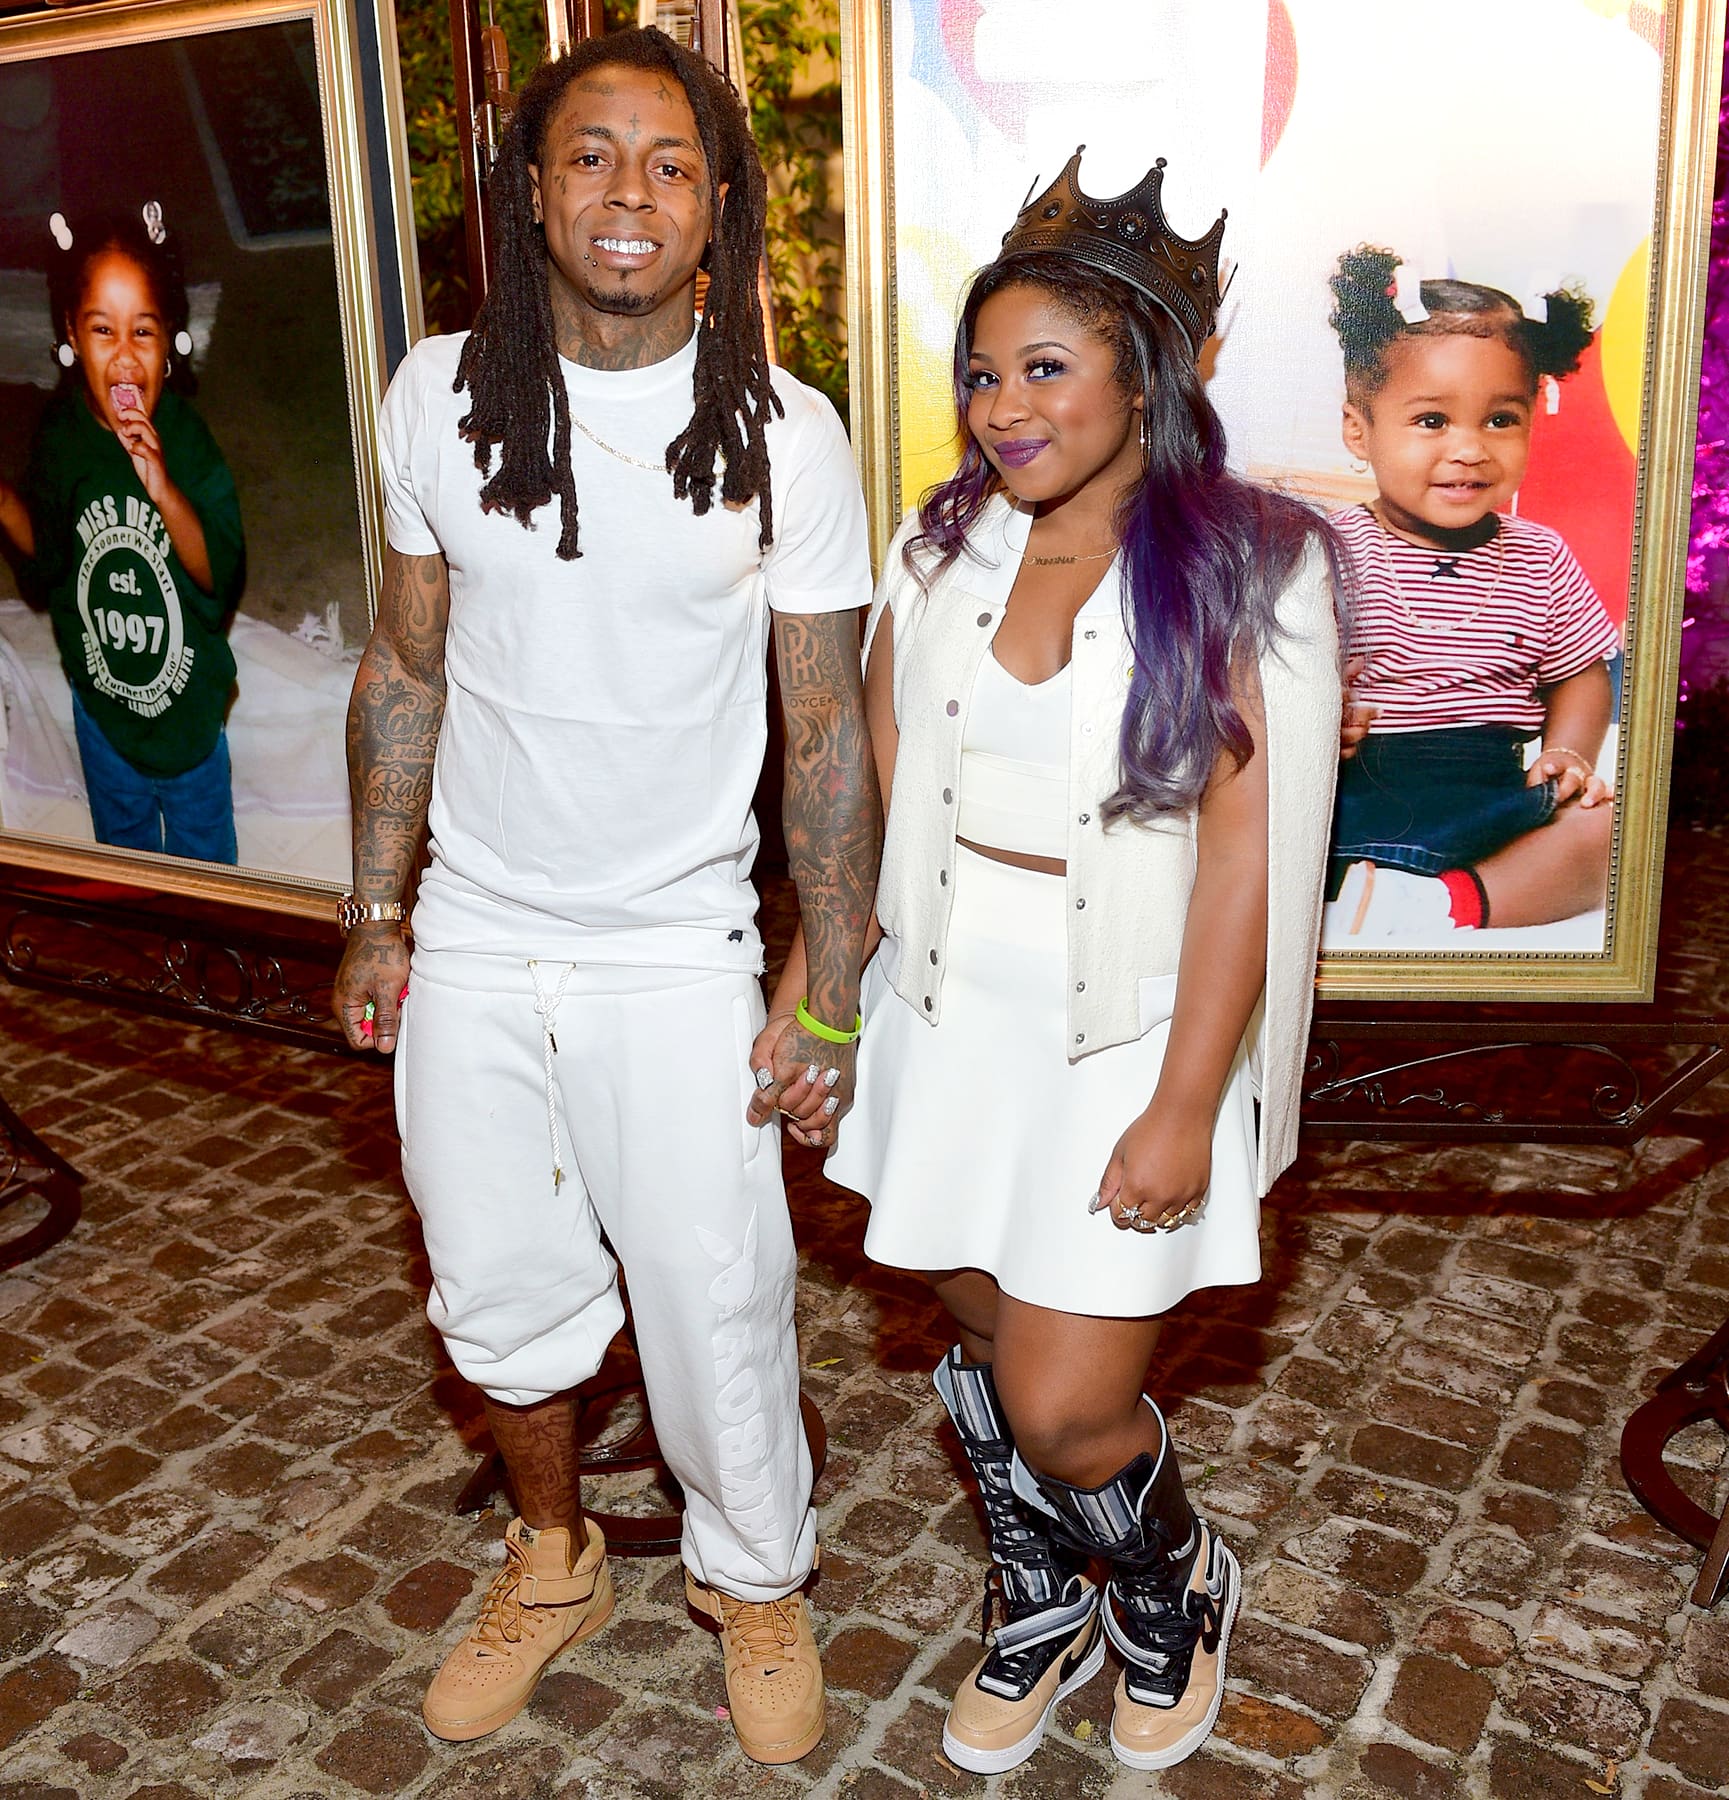 Reginae Carter Calls Her Dad Lil Wayne Her Twin See The Photo She Shared Celebrity Insider